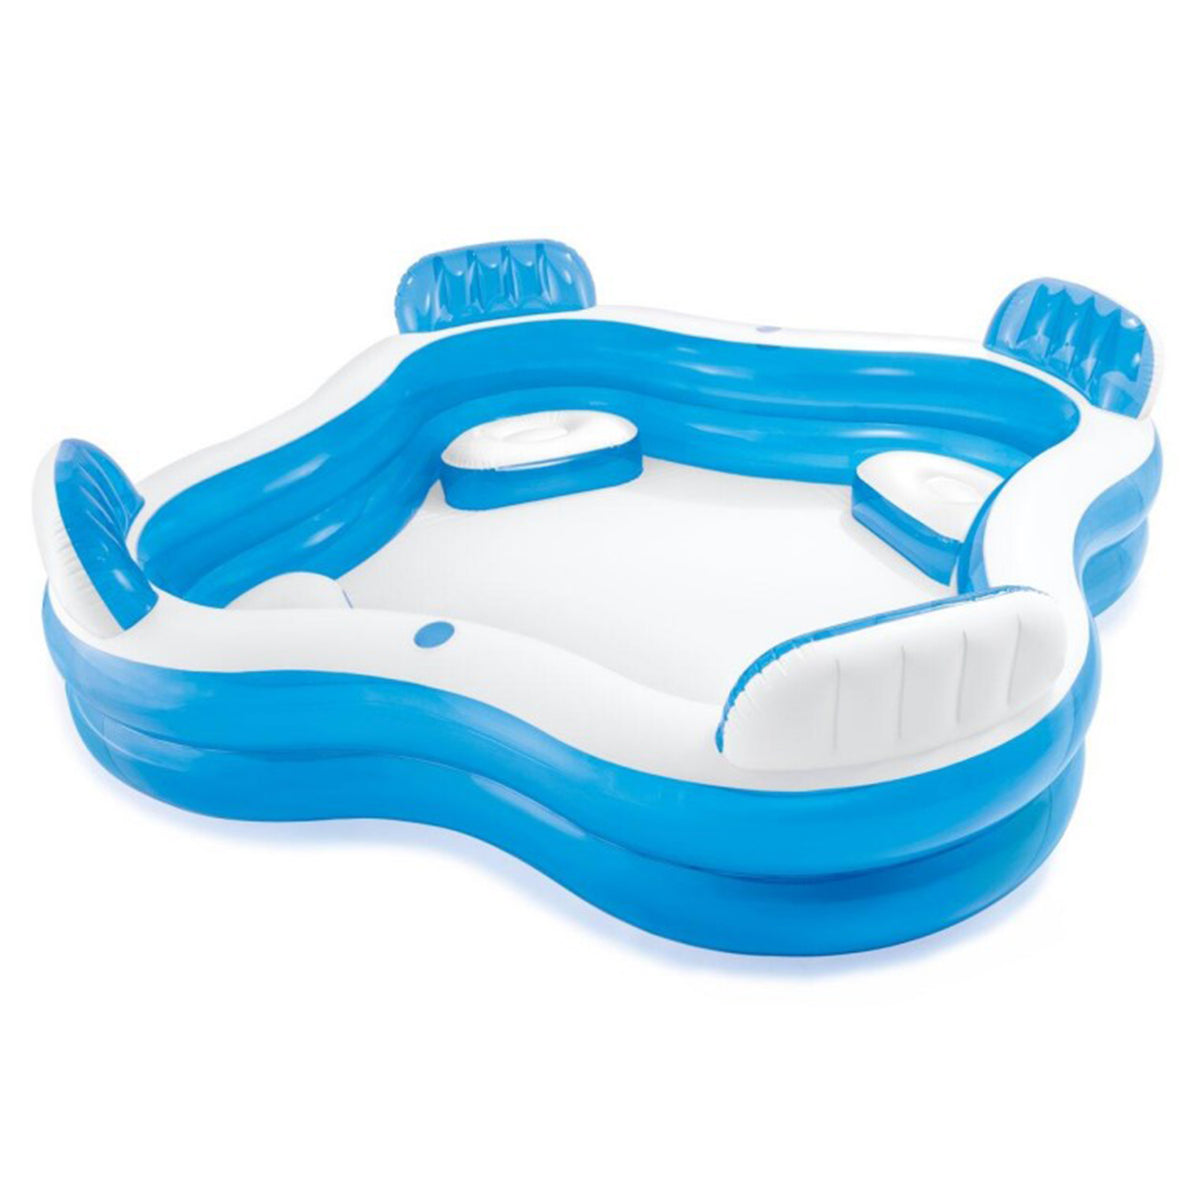 Inflatable Pool, Blue & White